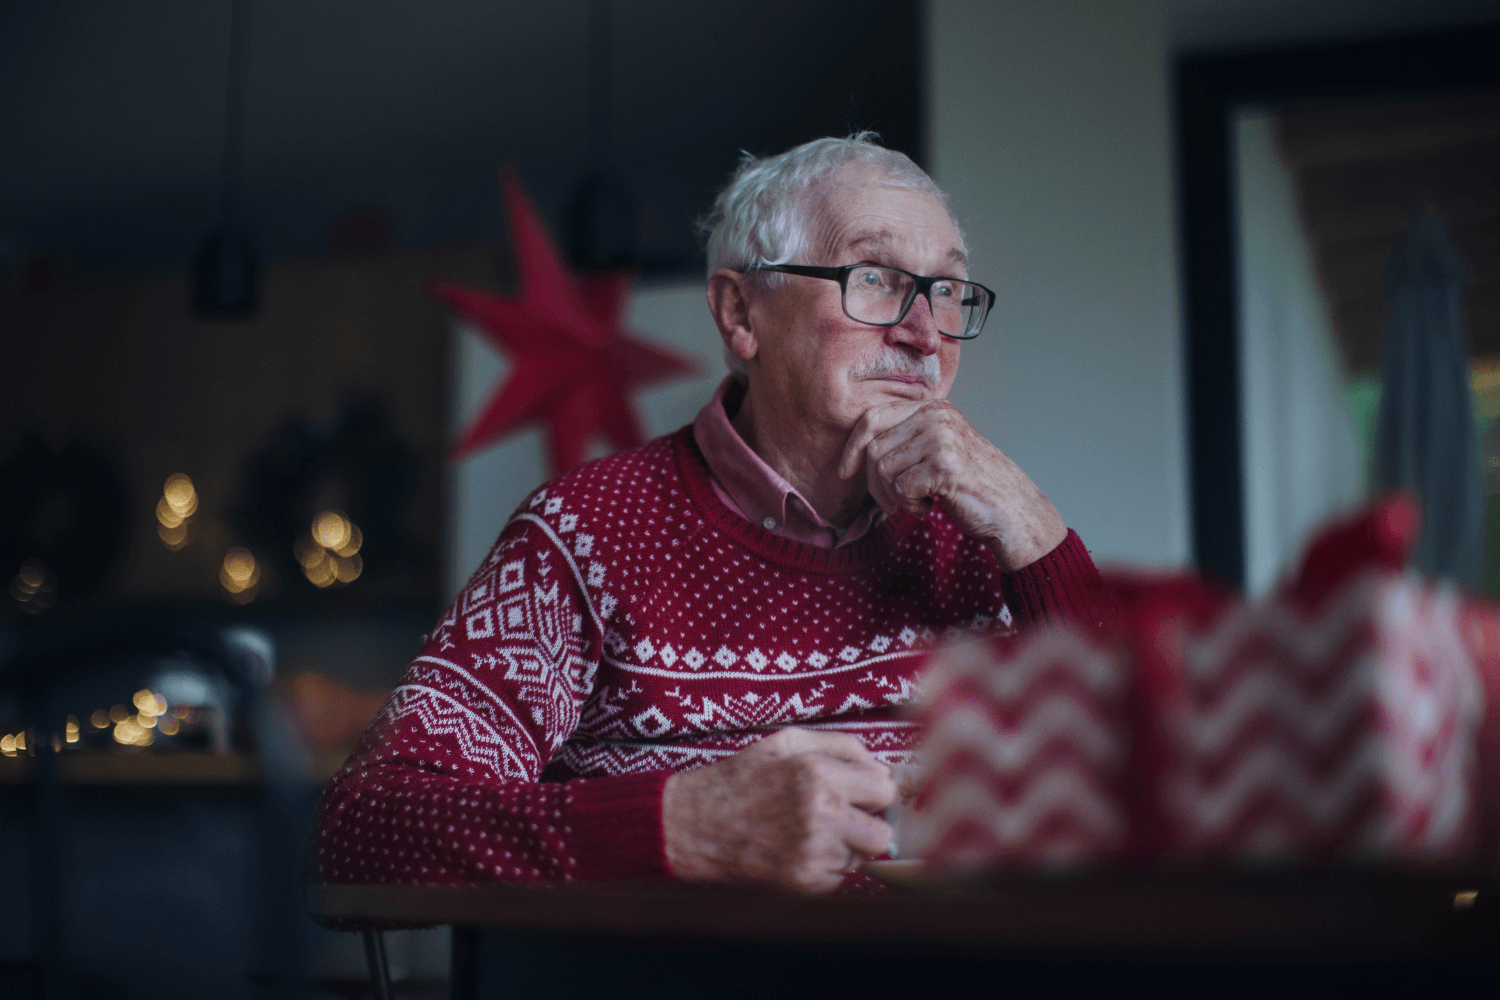 Elderly man unhappy and alone during Christmas